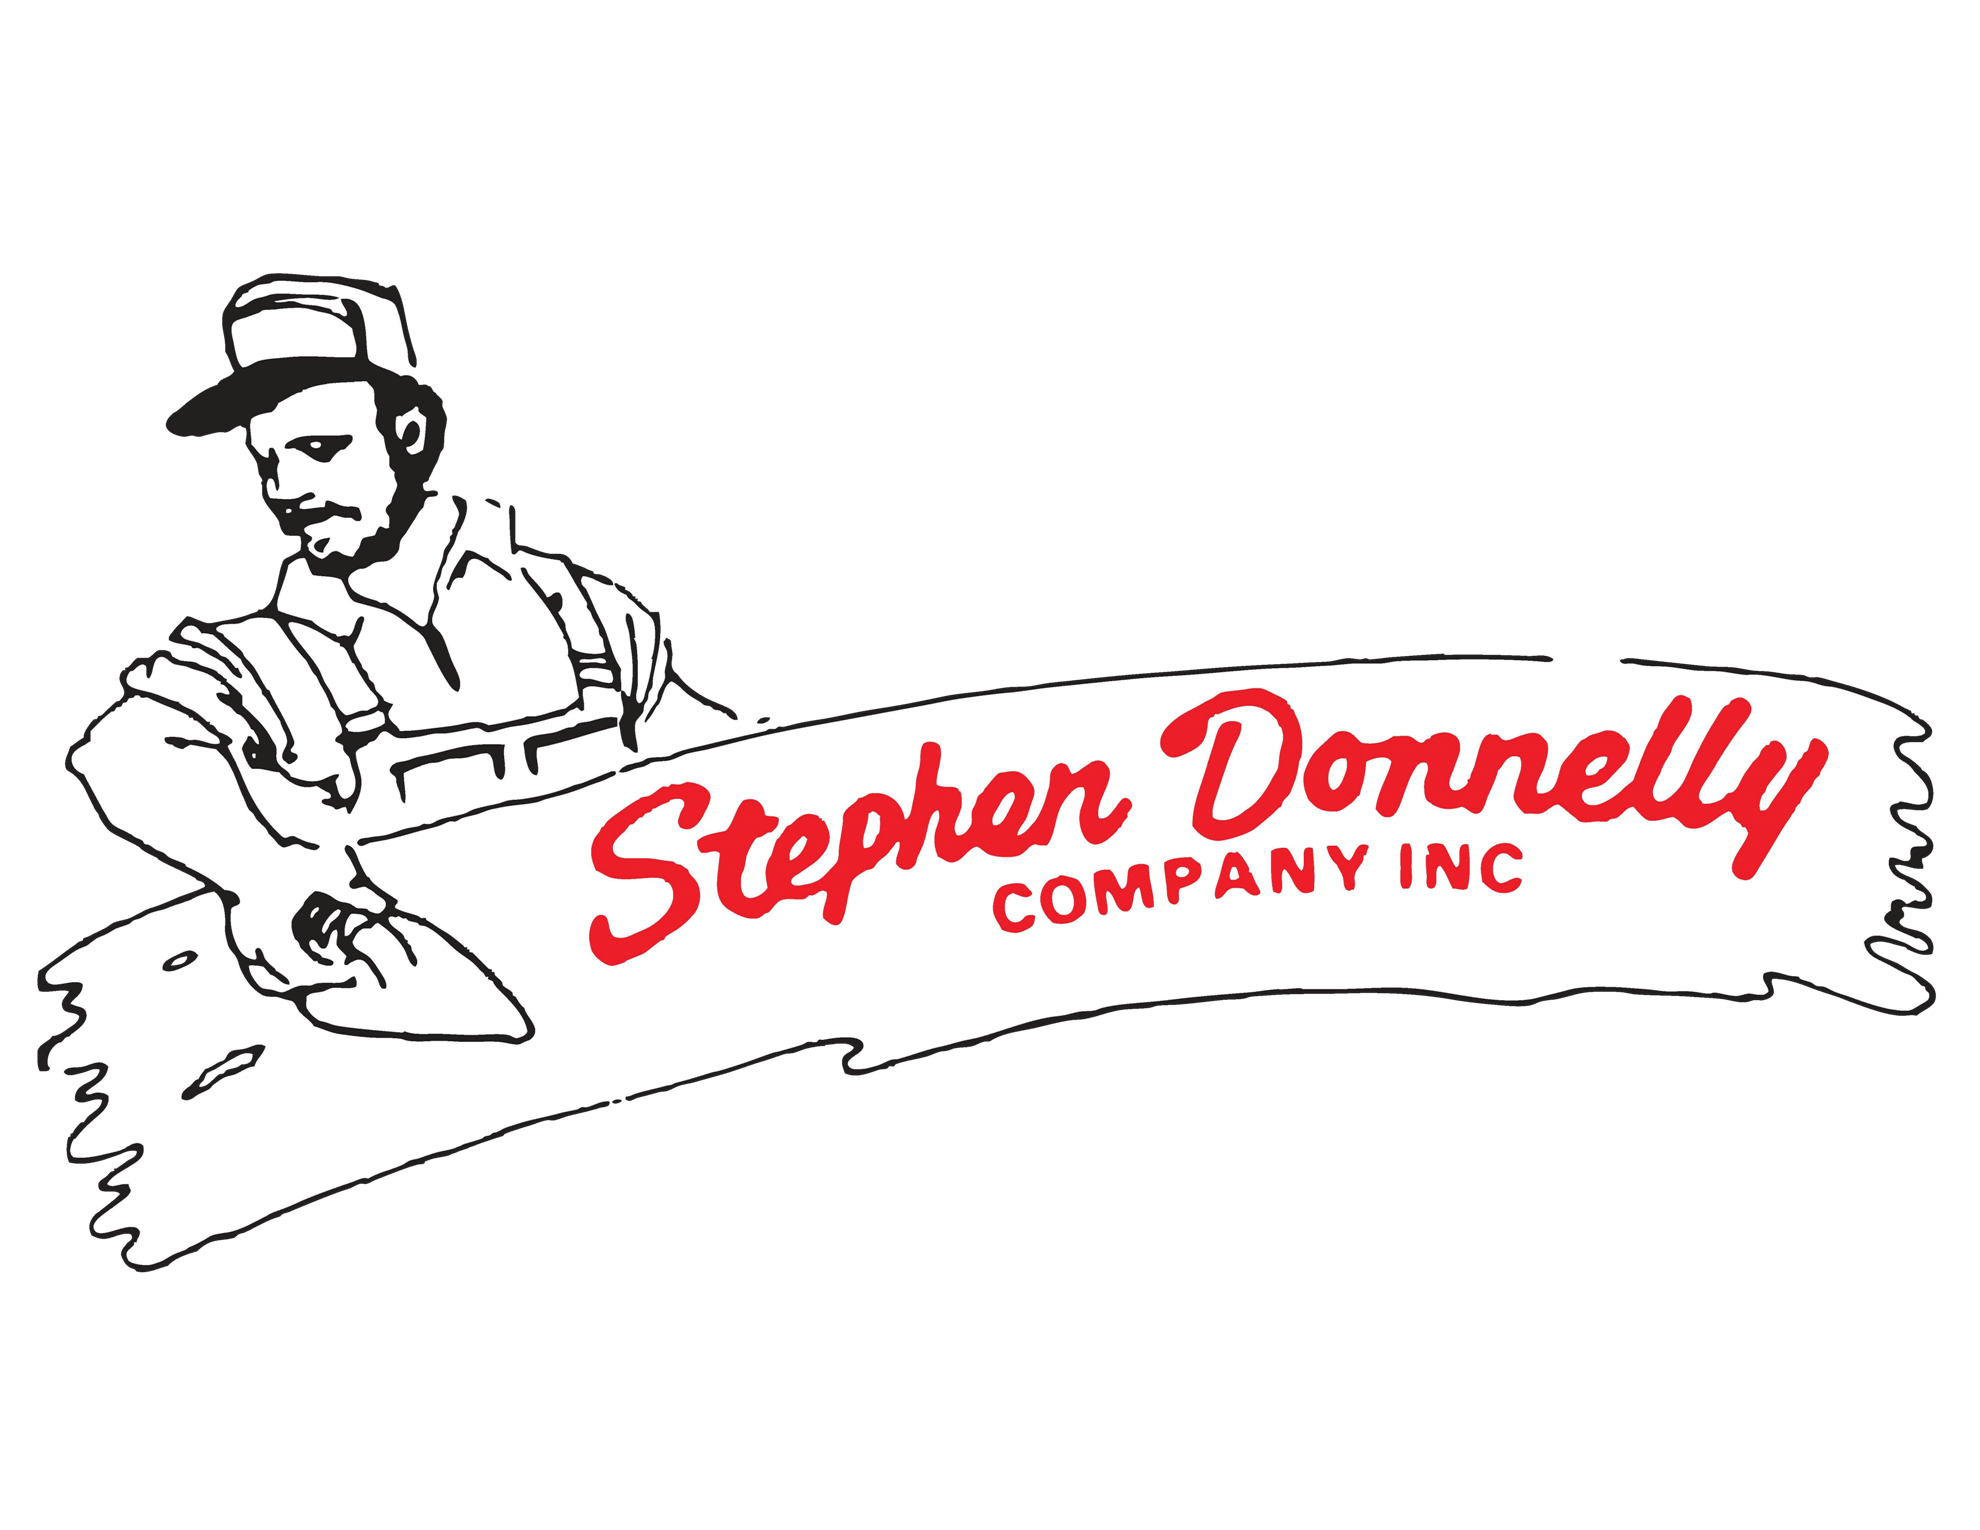 Stephen Donnelly Company, Inc. Logo